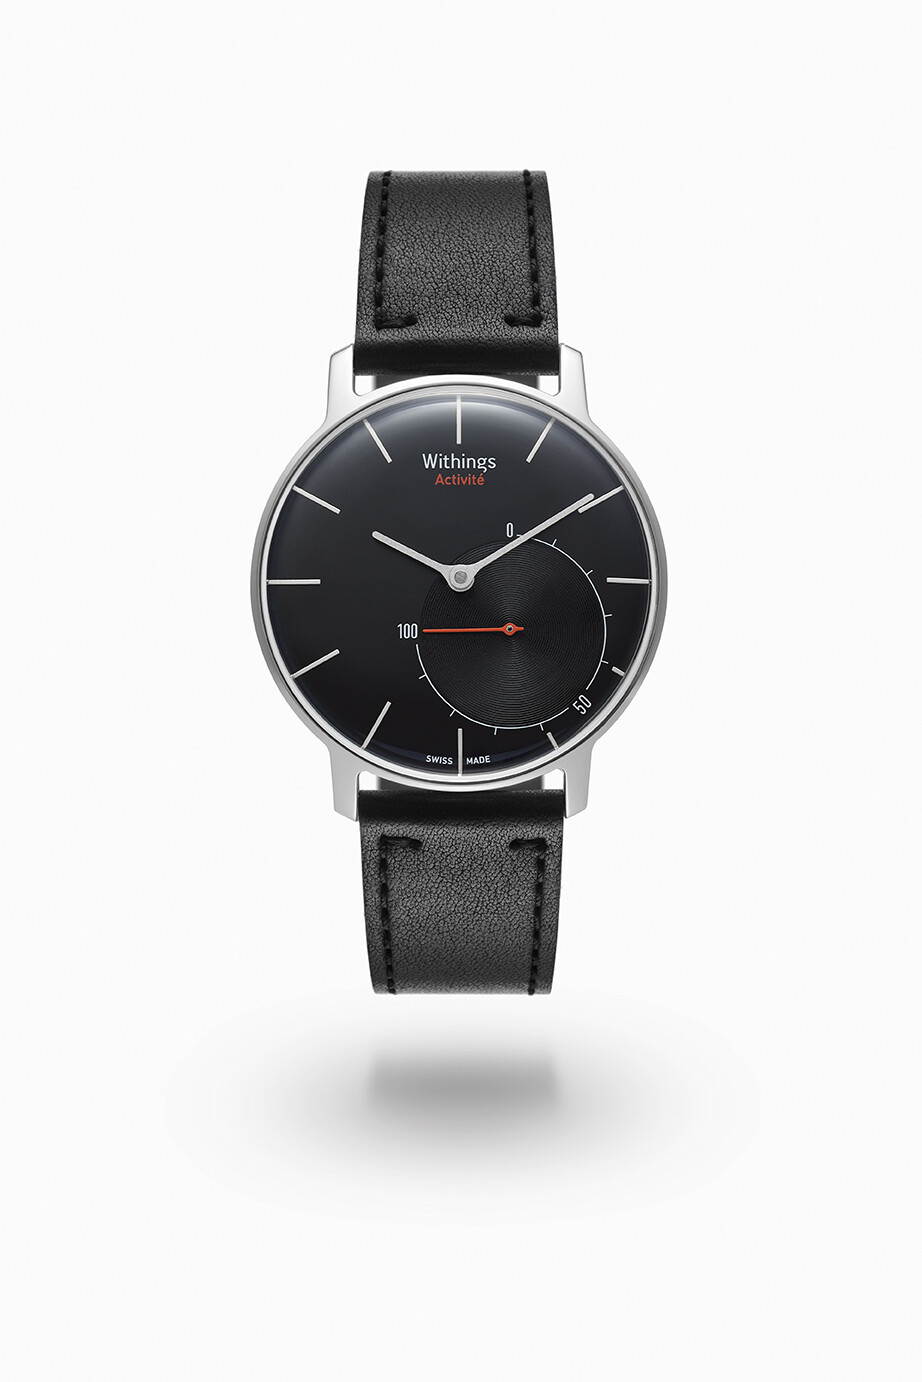 3.Withings_Activité_black_front